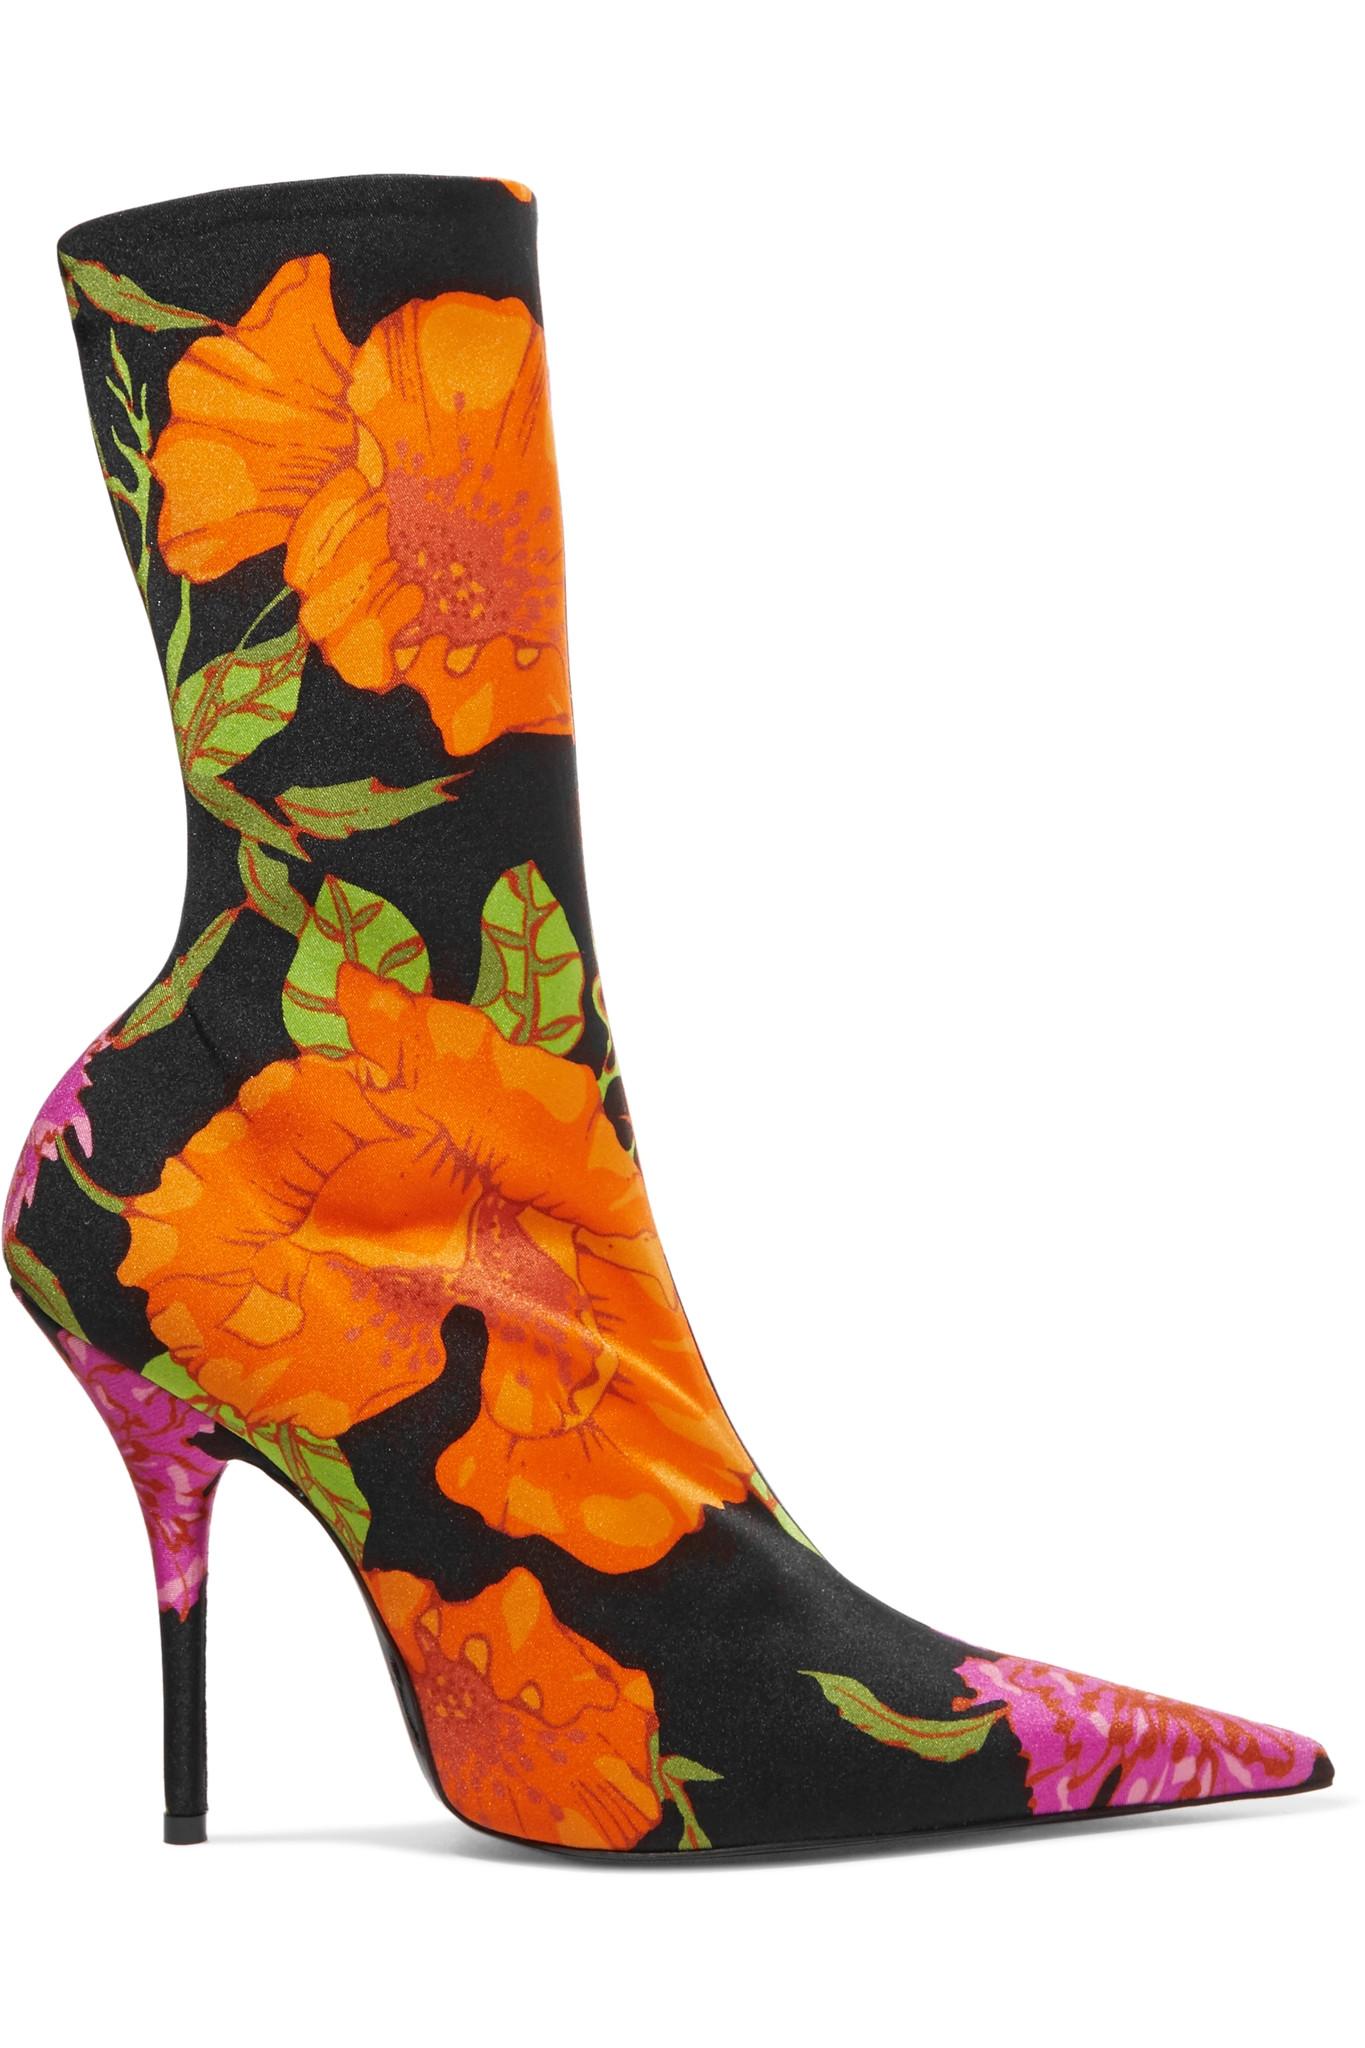 Lyst - Balenciaga Floral-print Spandex Ankle Boots in Black